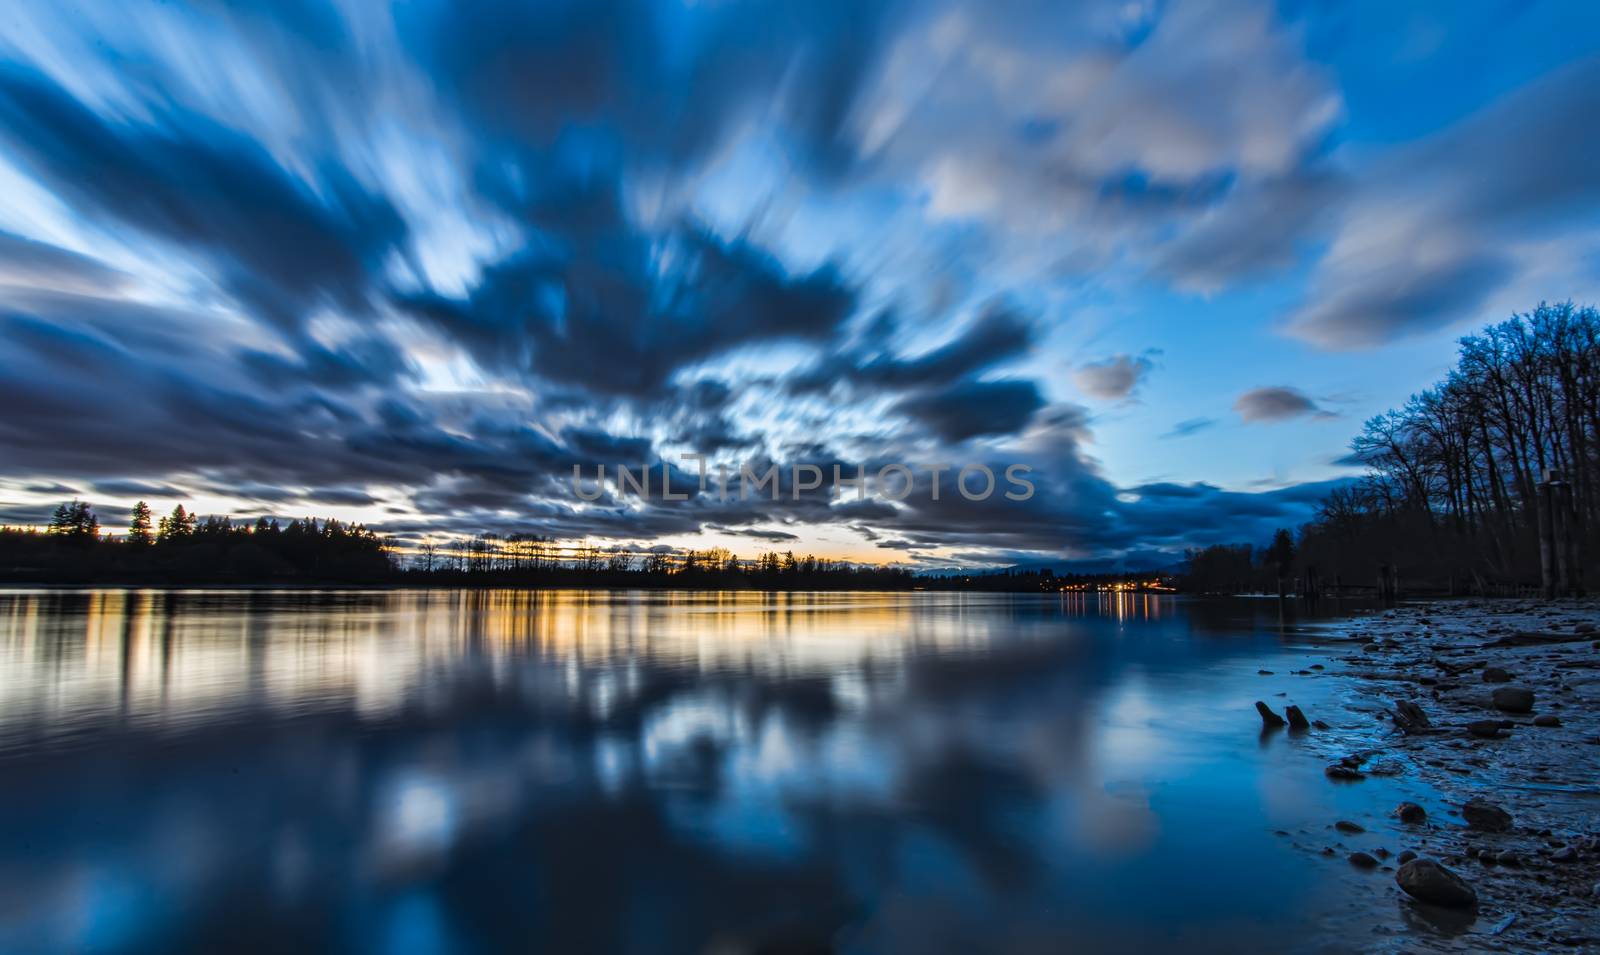 Blue Blurred Moving Clouds Over River by JamesWheeler